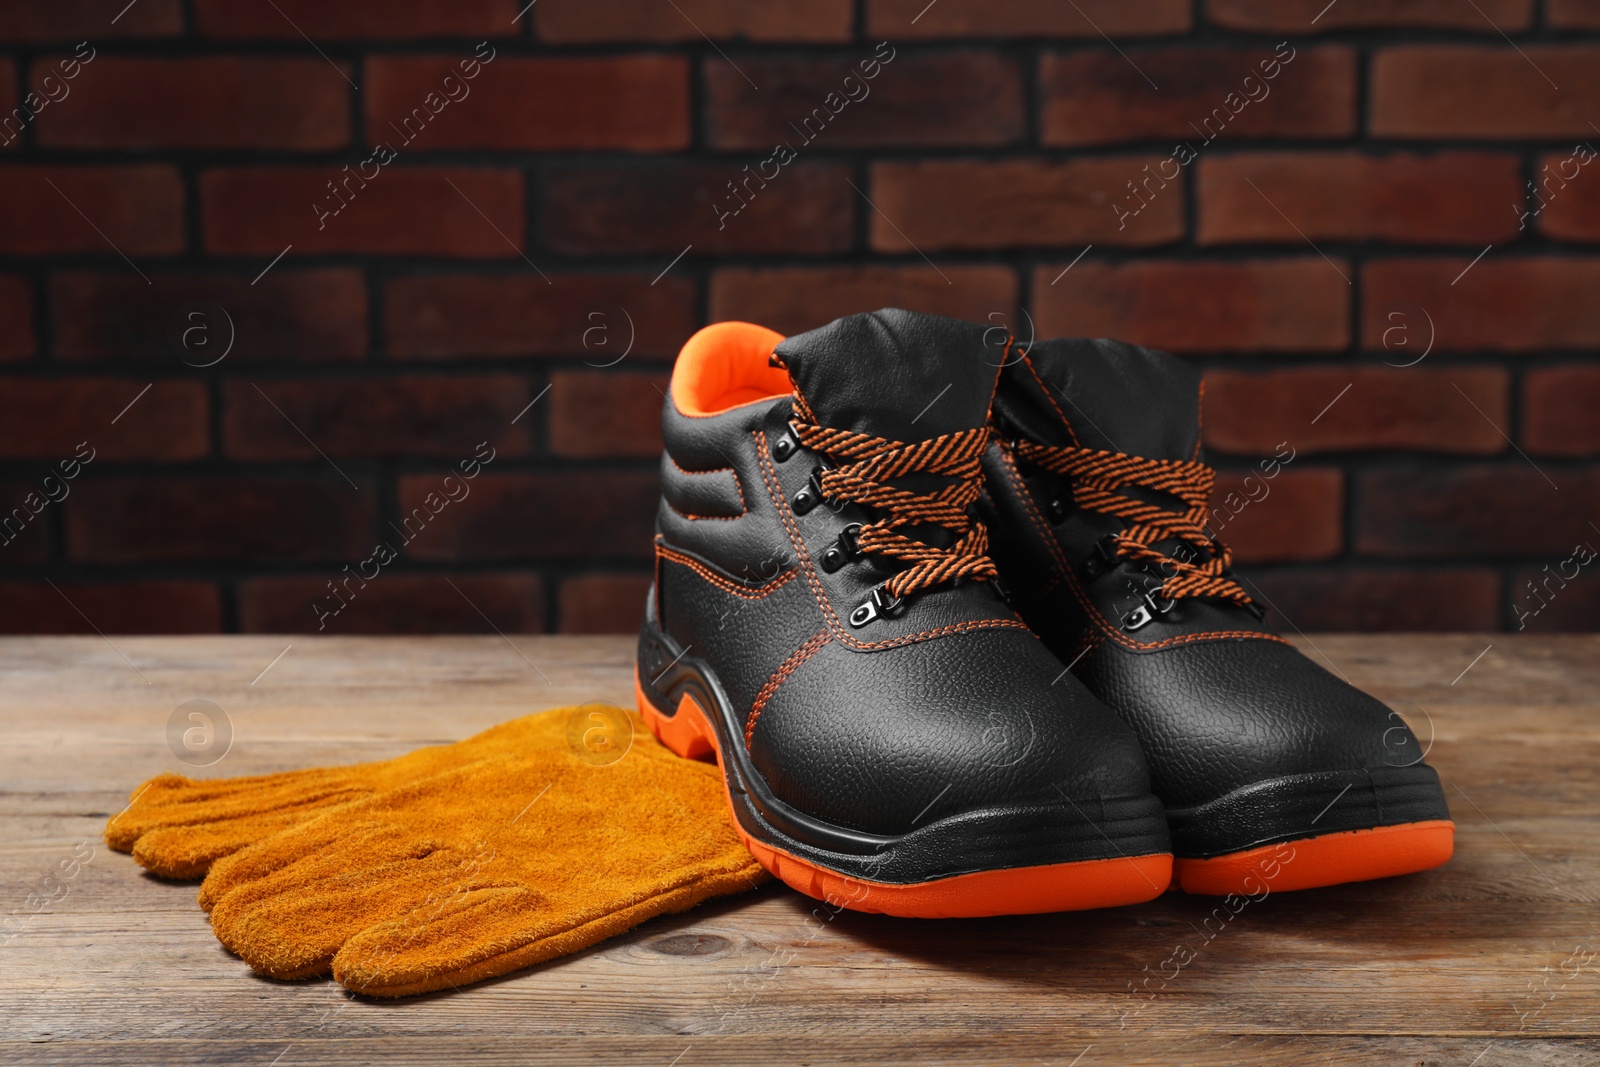 Photo of Pair of working boots and protective gloves on wooden surface